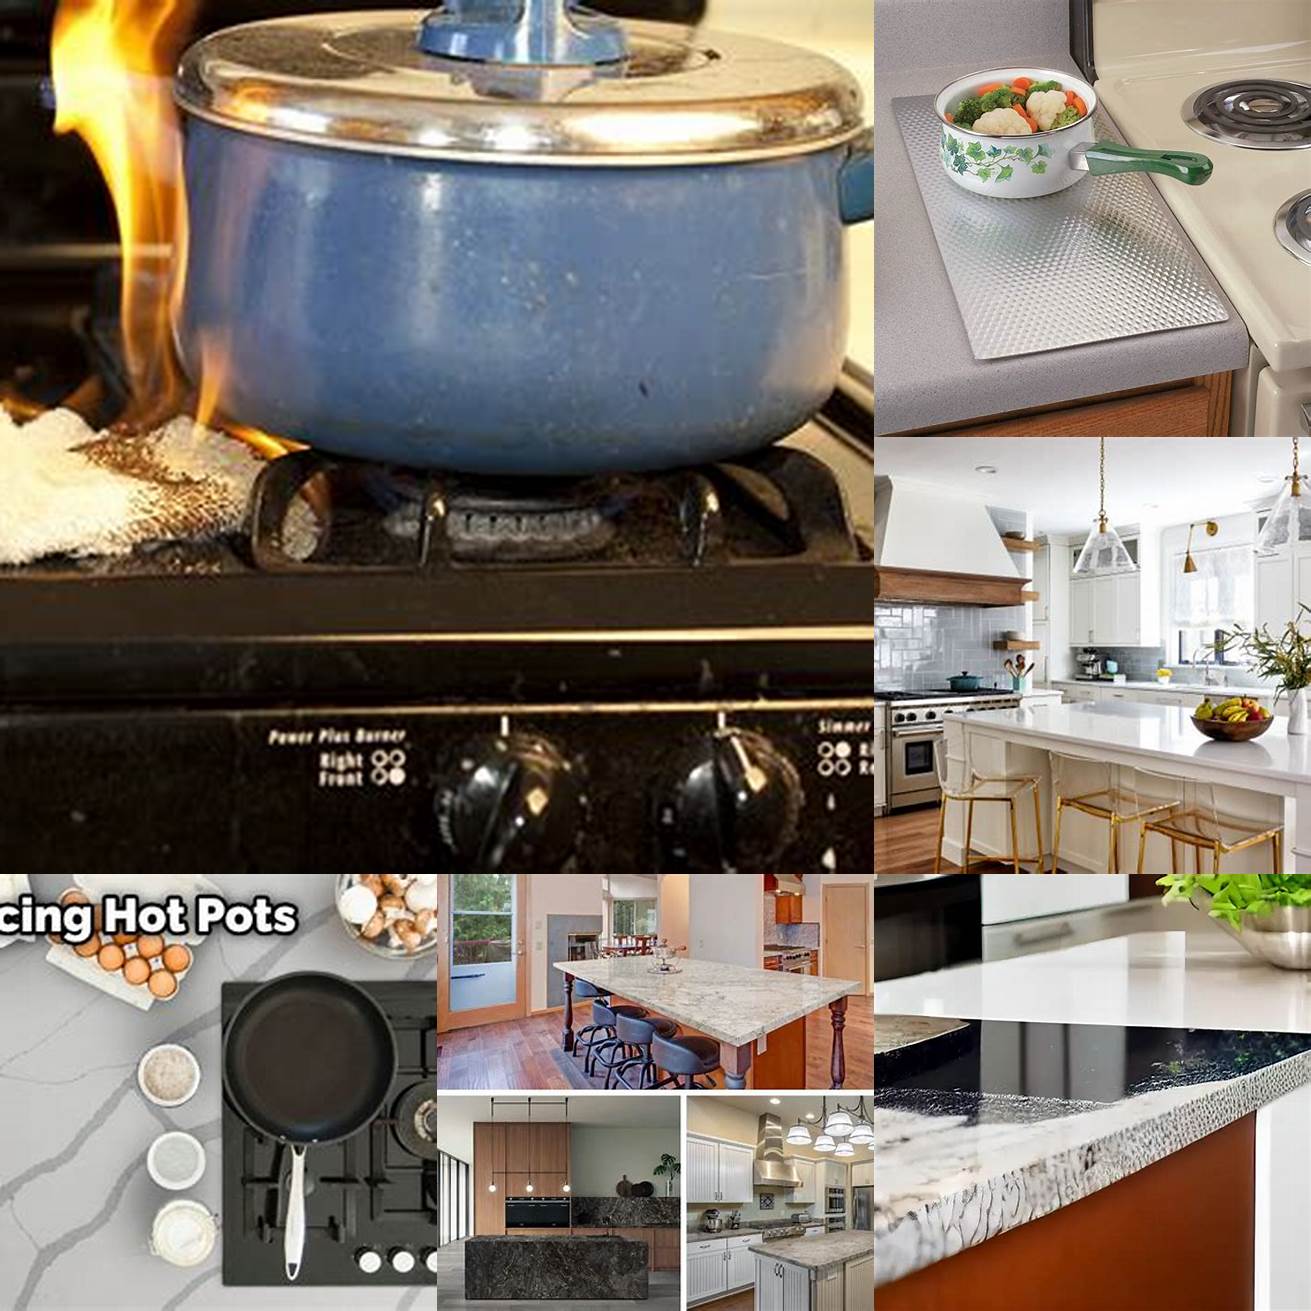 Avoid placing hot items directly on the countertop as it can cause damage